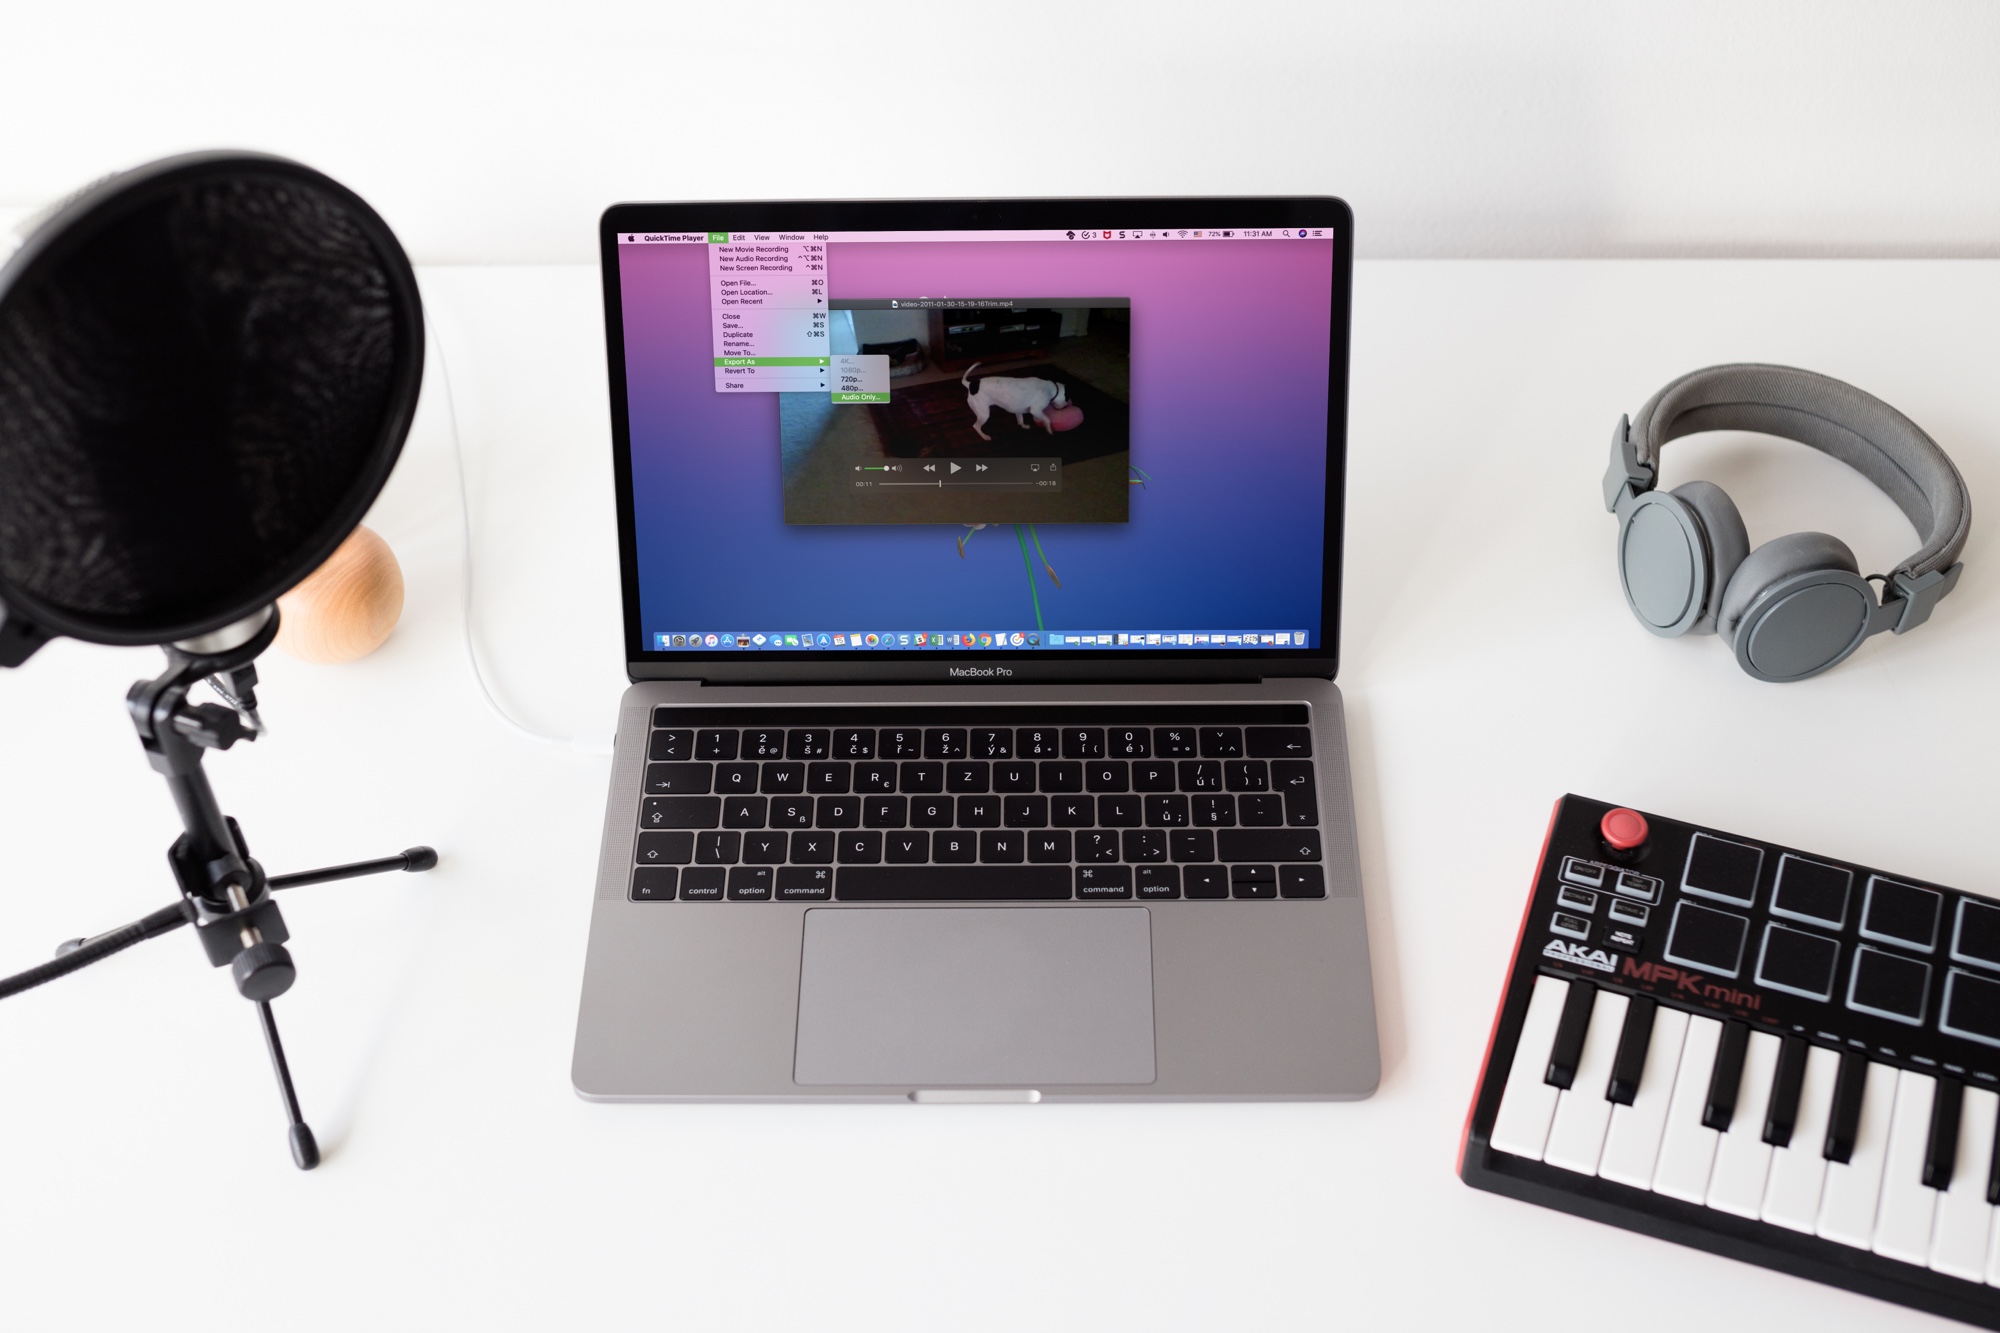 Extract-Audio-from-Video-on-MacBook-with-QuickTime